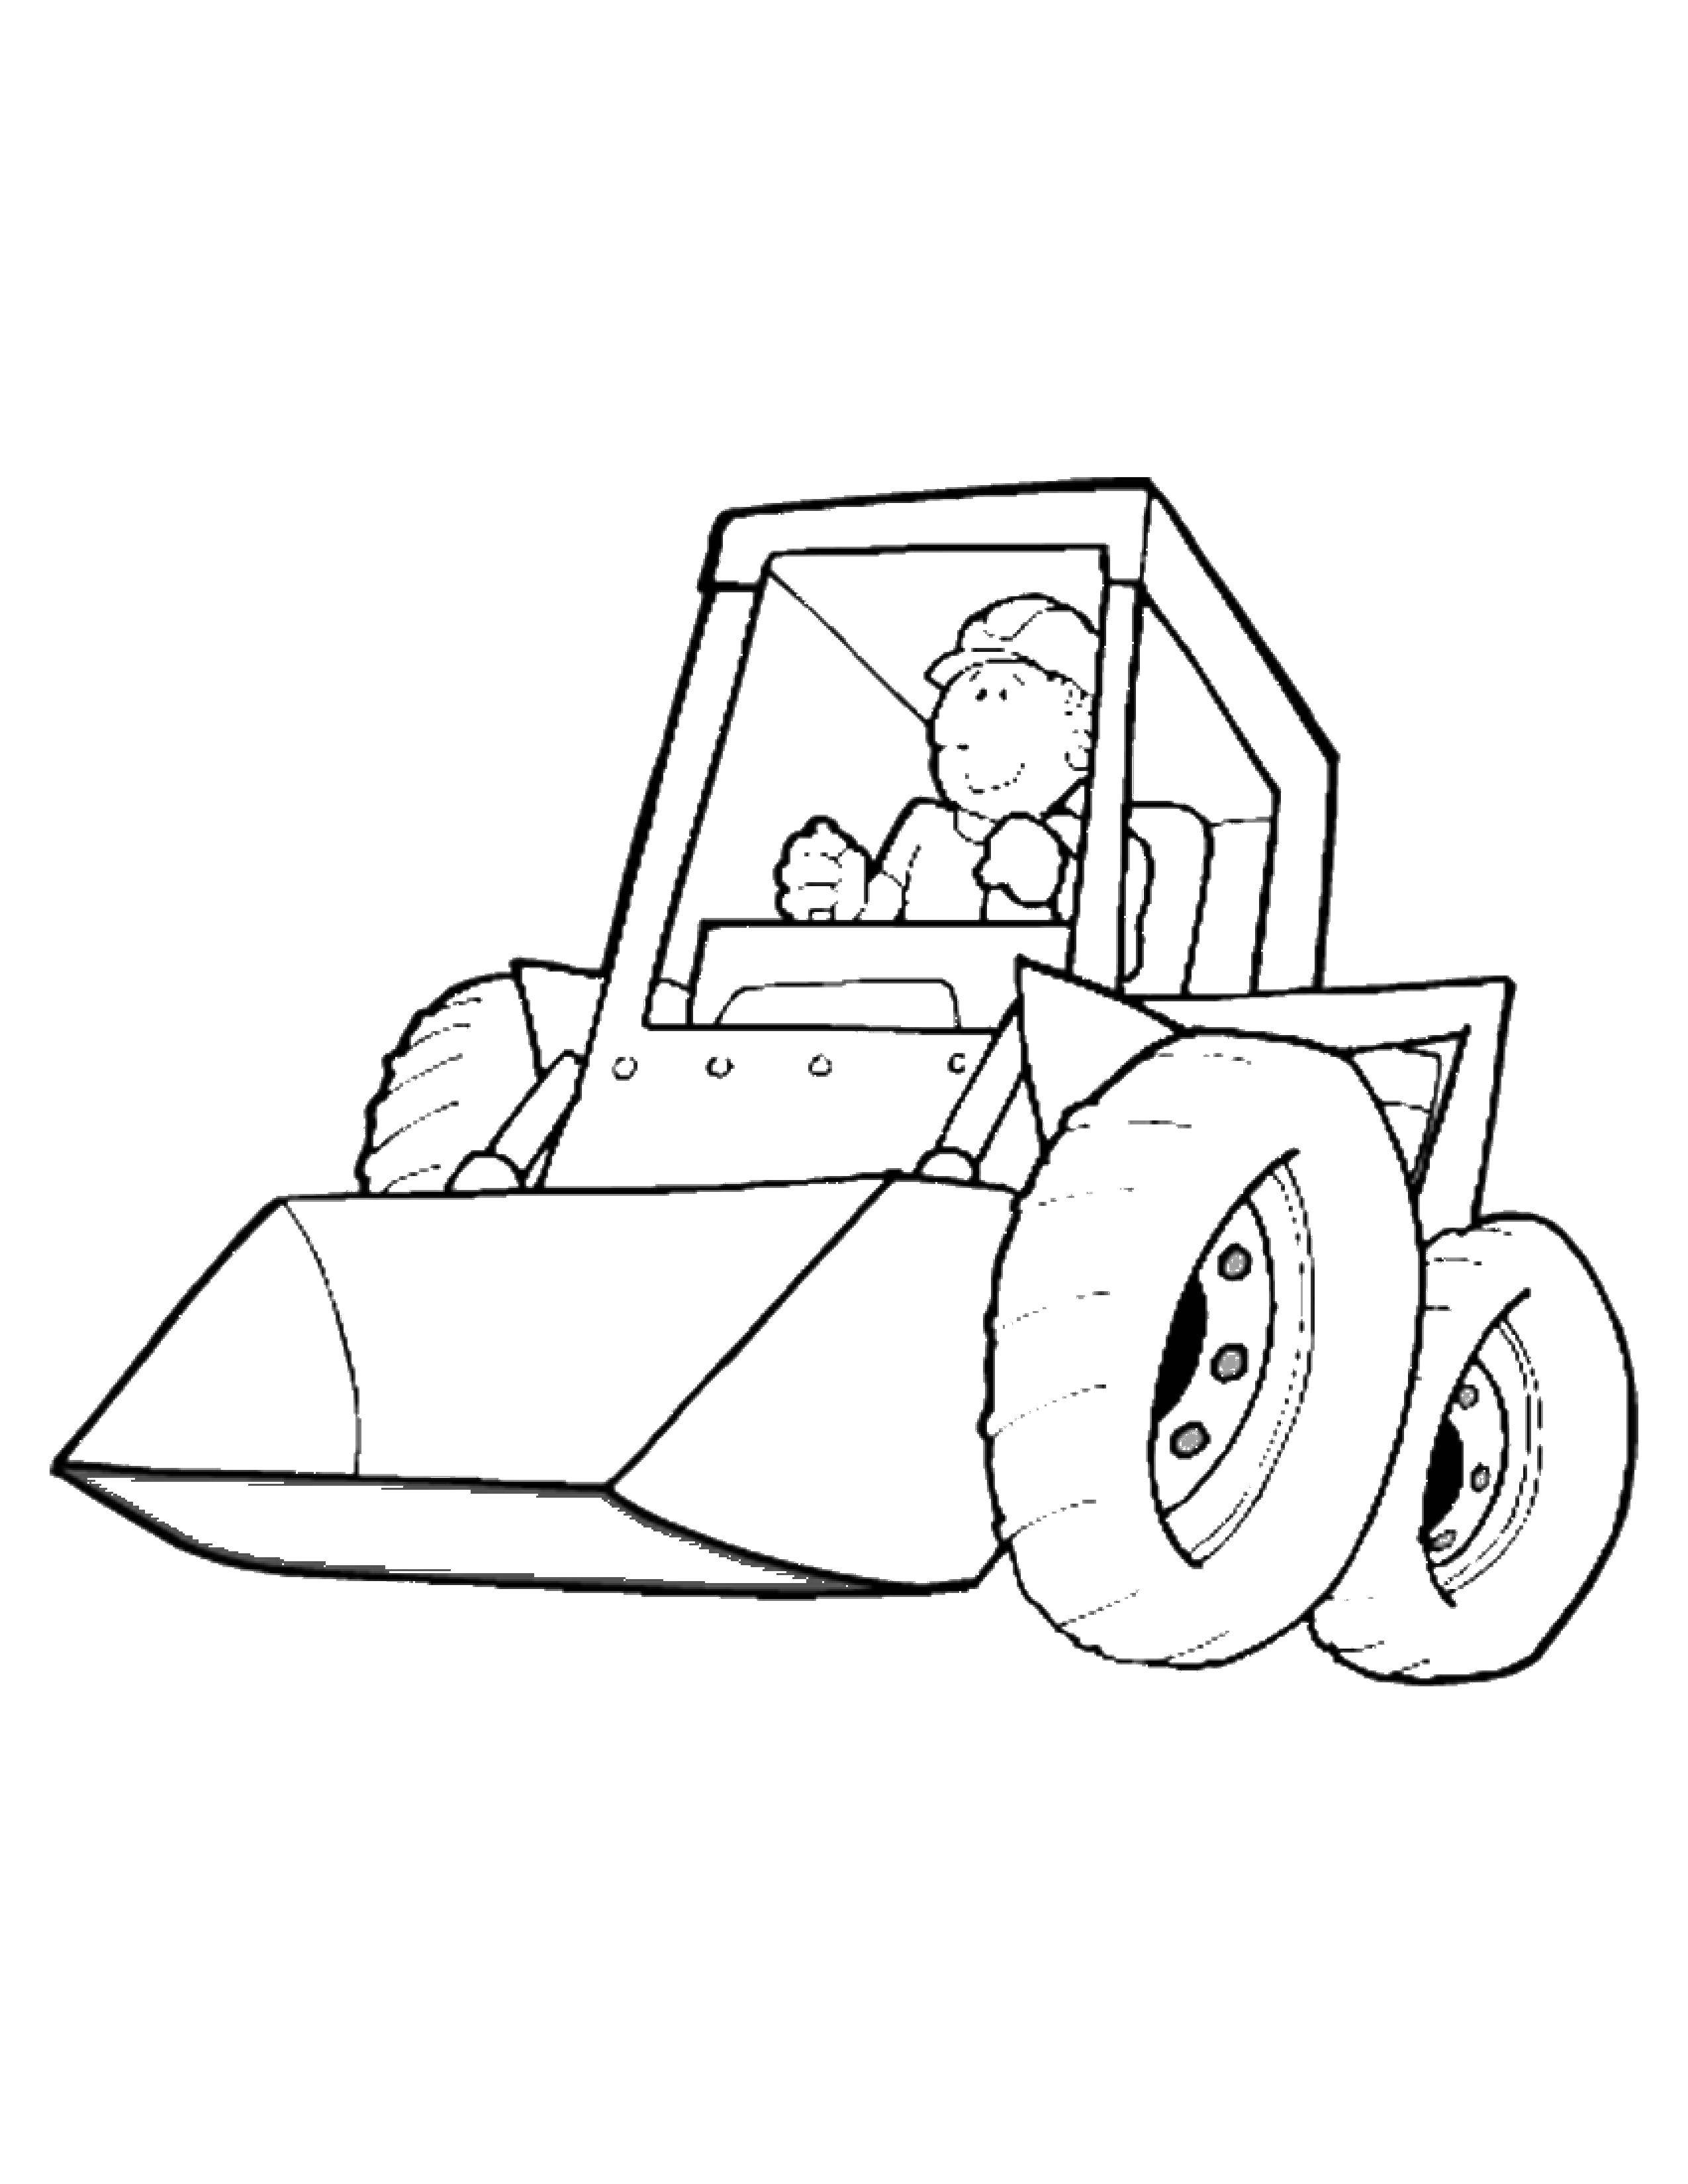 Coloring Tractor driving. Category transportation. Tags:  Transport, tractor.